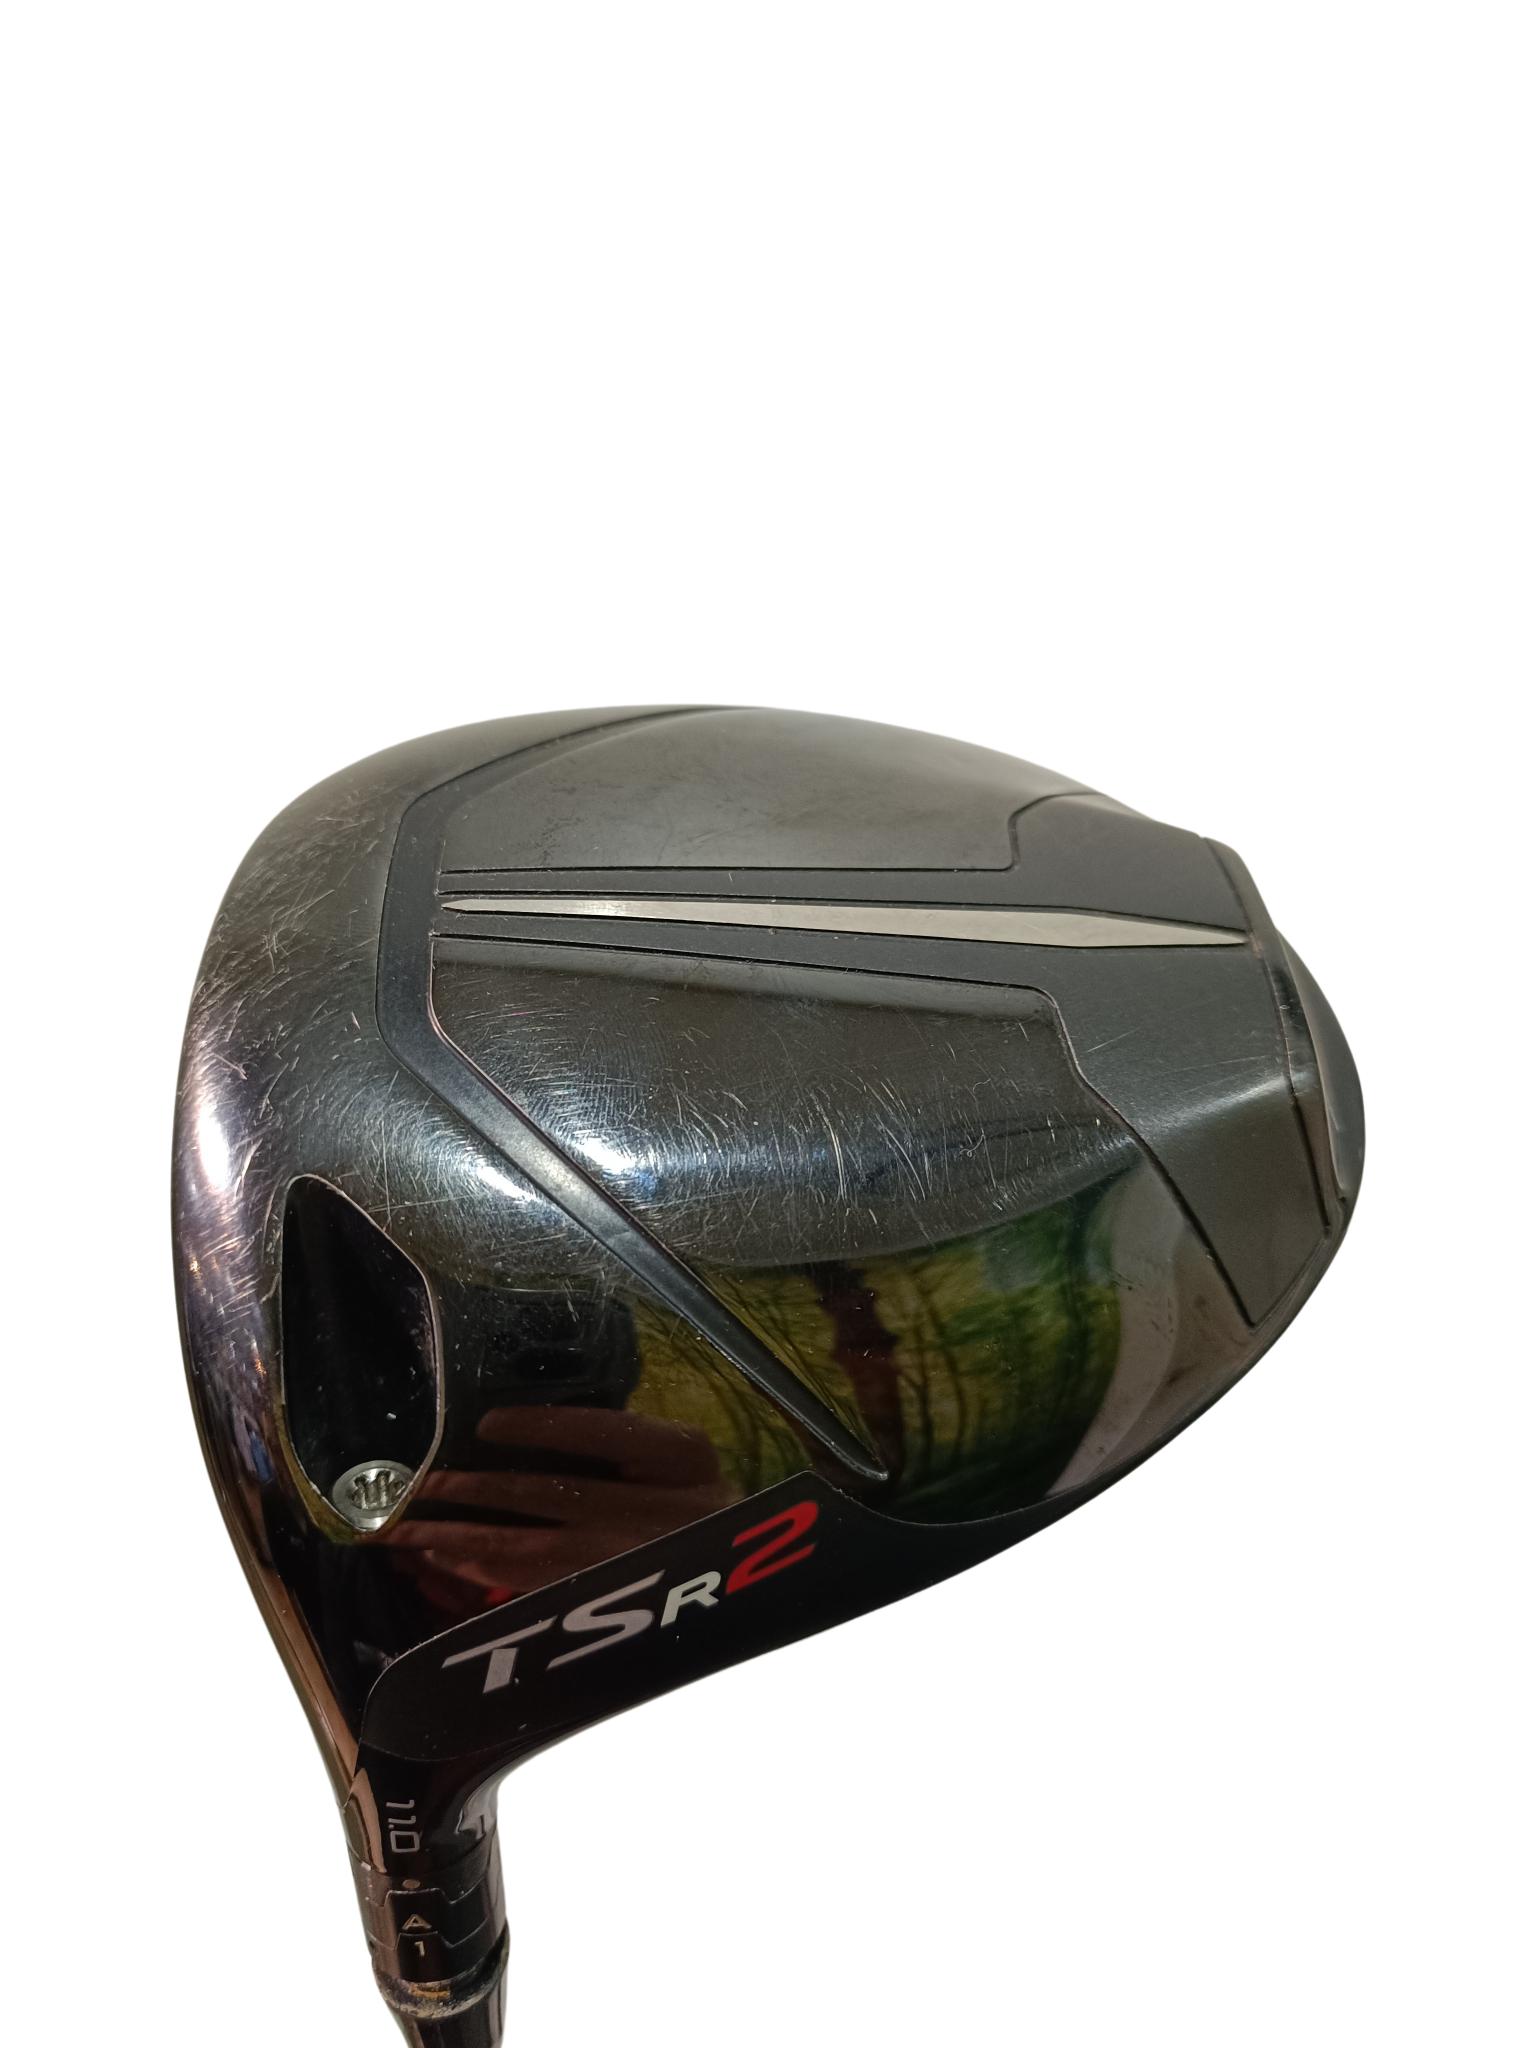 Pre-owned Titleist TSR 2 Men's Driver